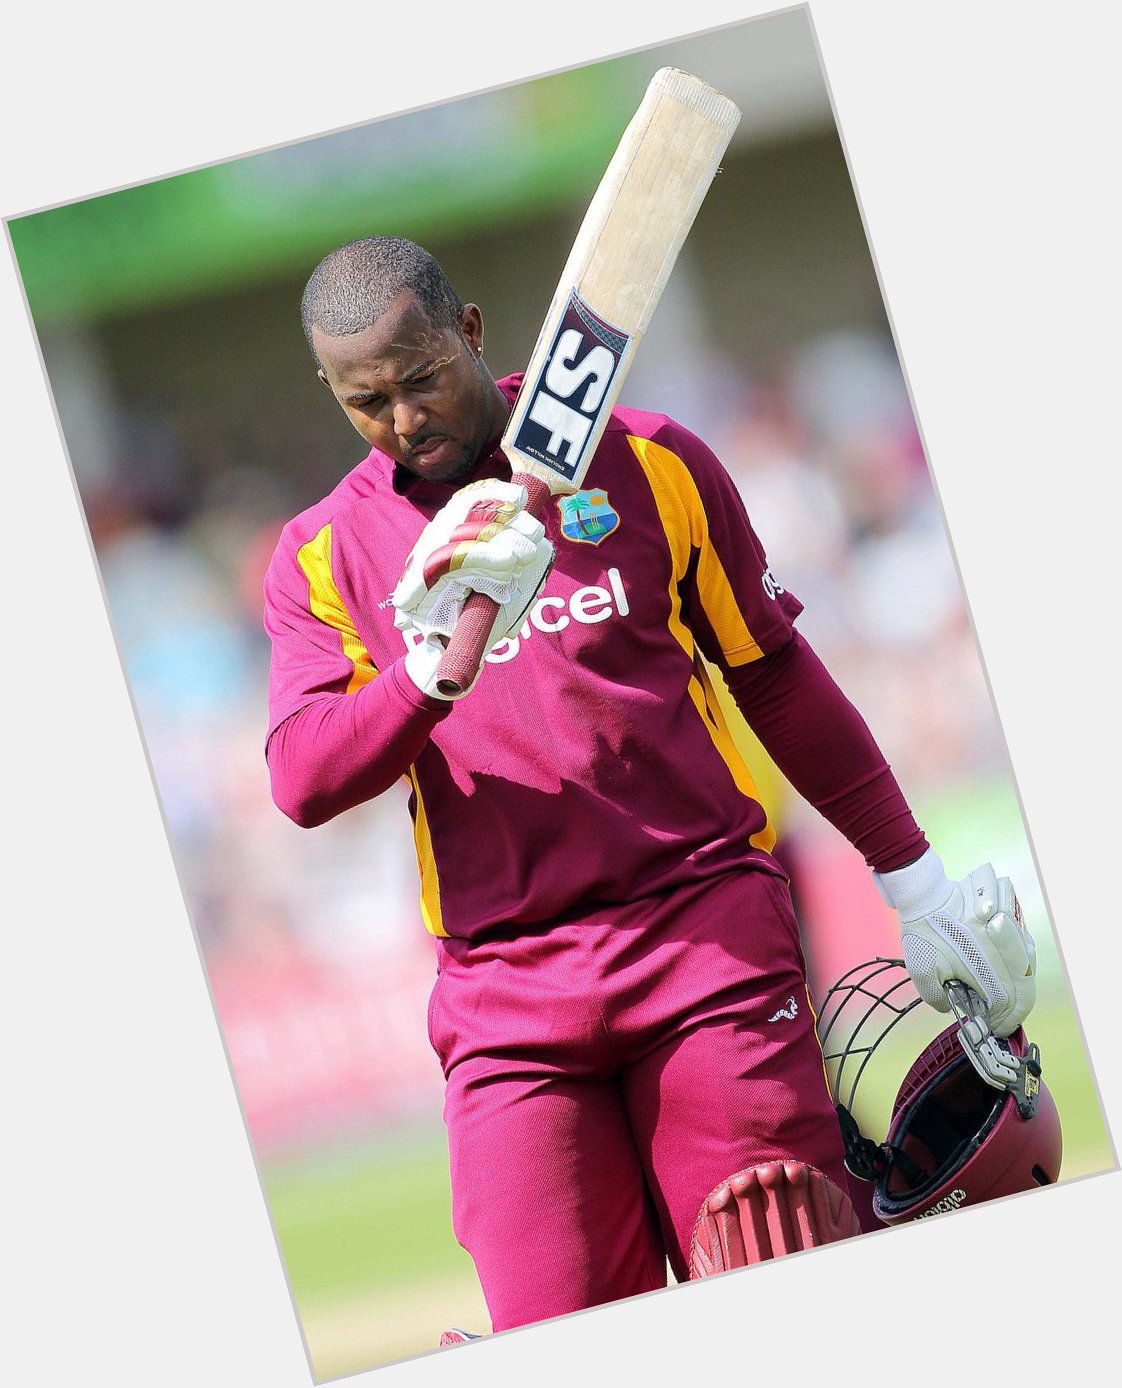 Happy birthday to former West Indies all-rounder Dwayne Smith! 